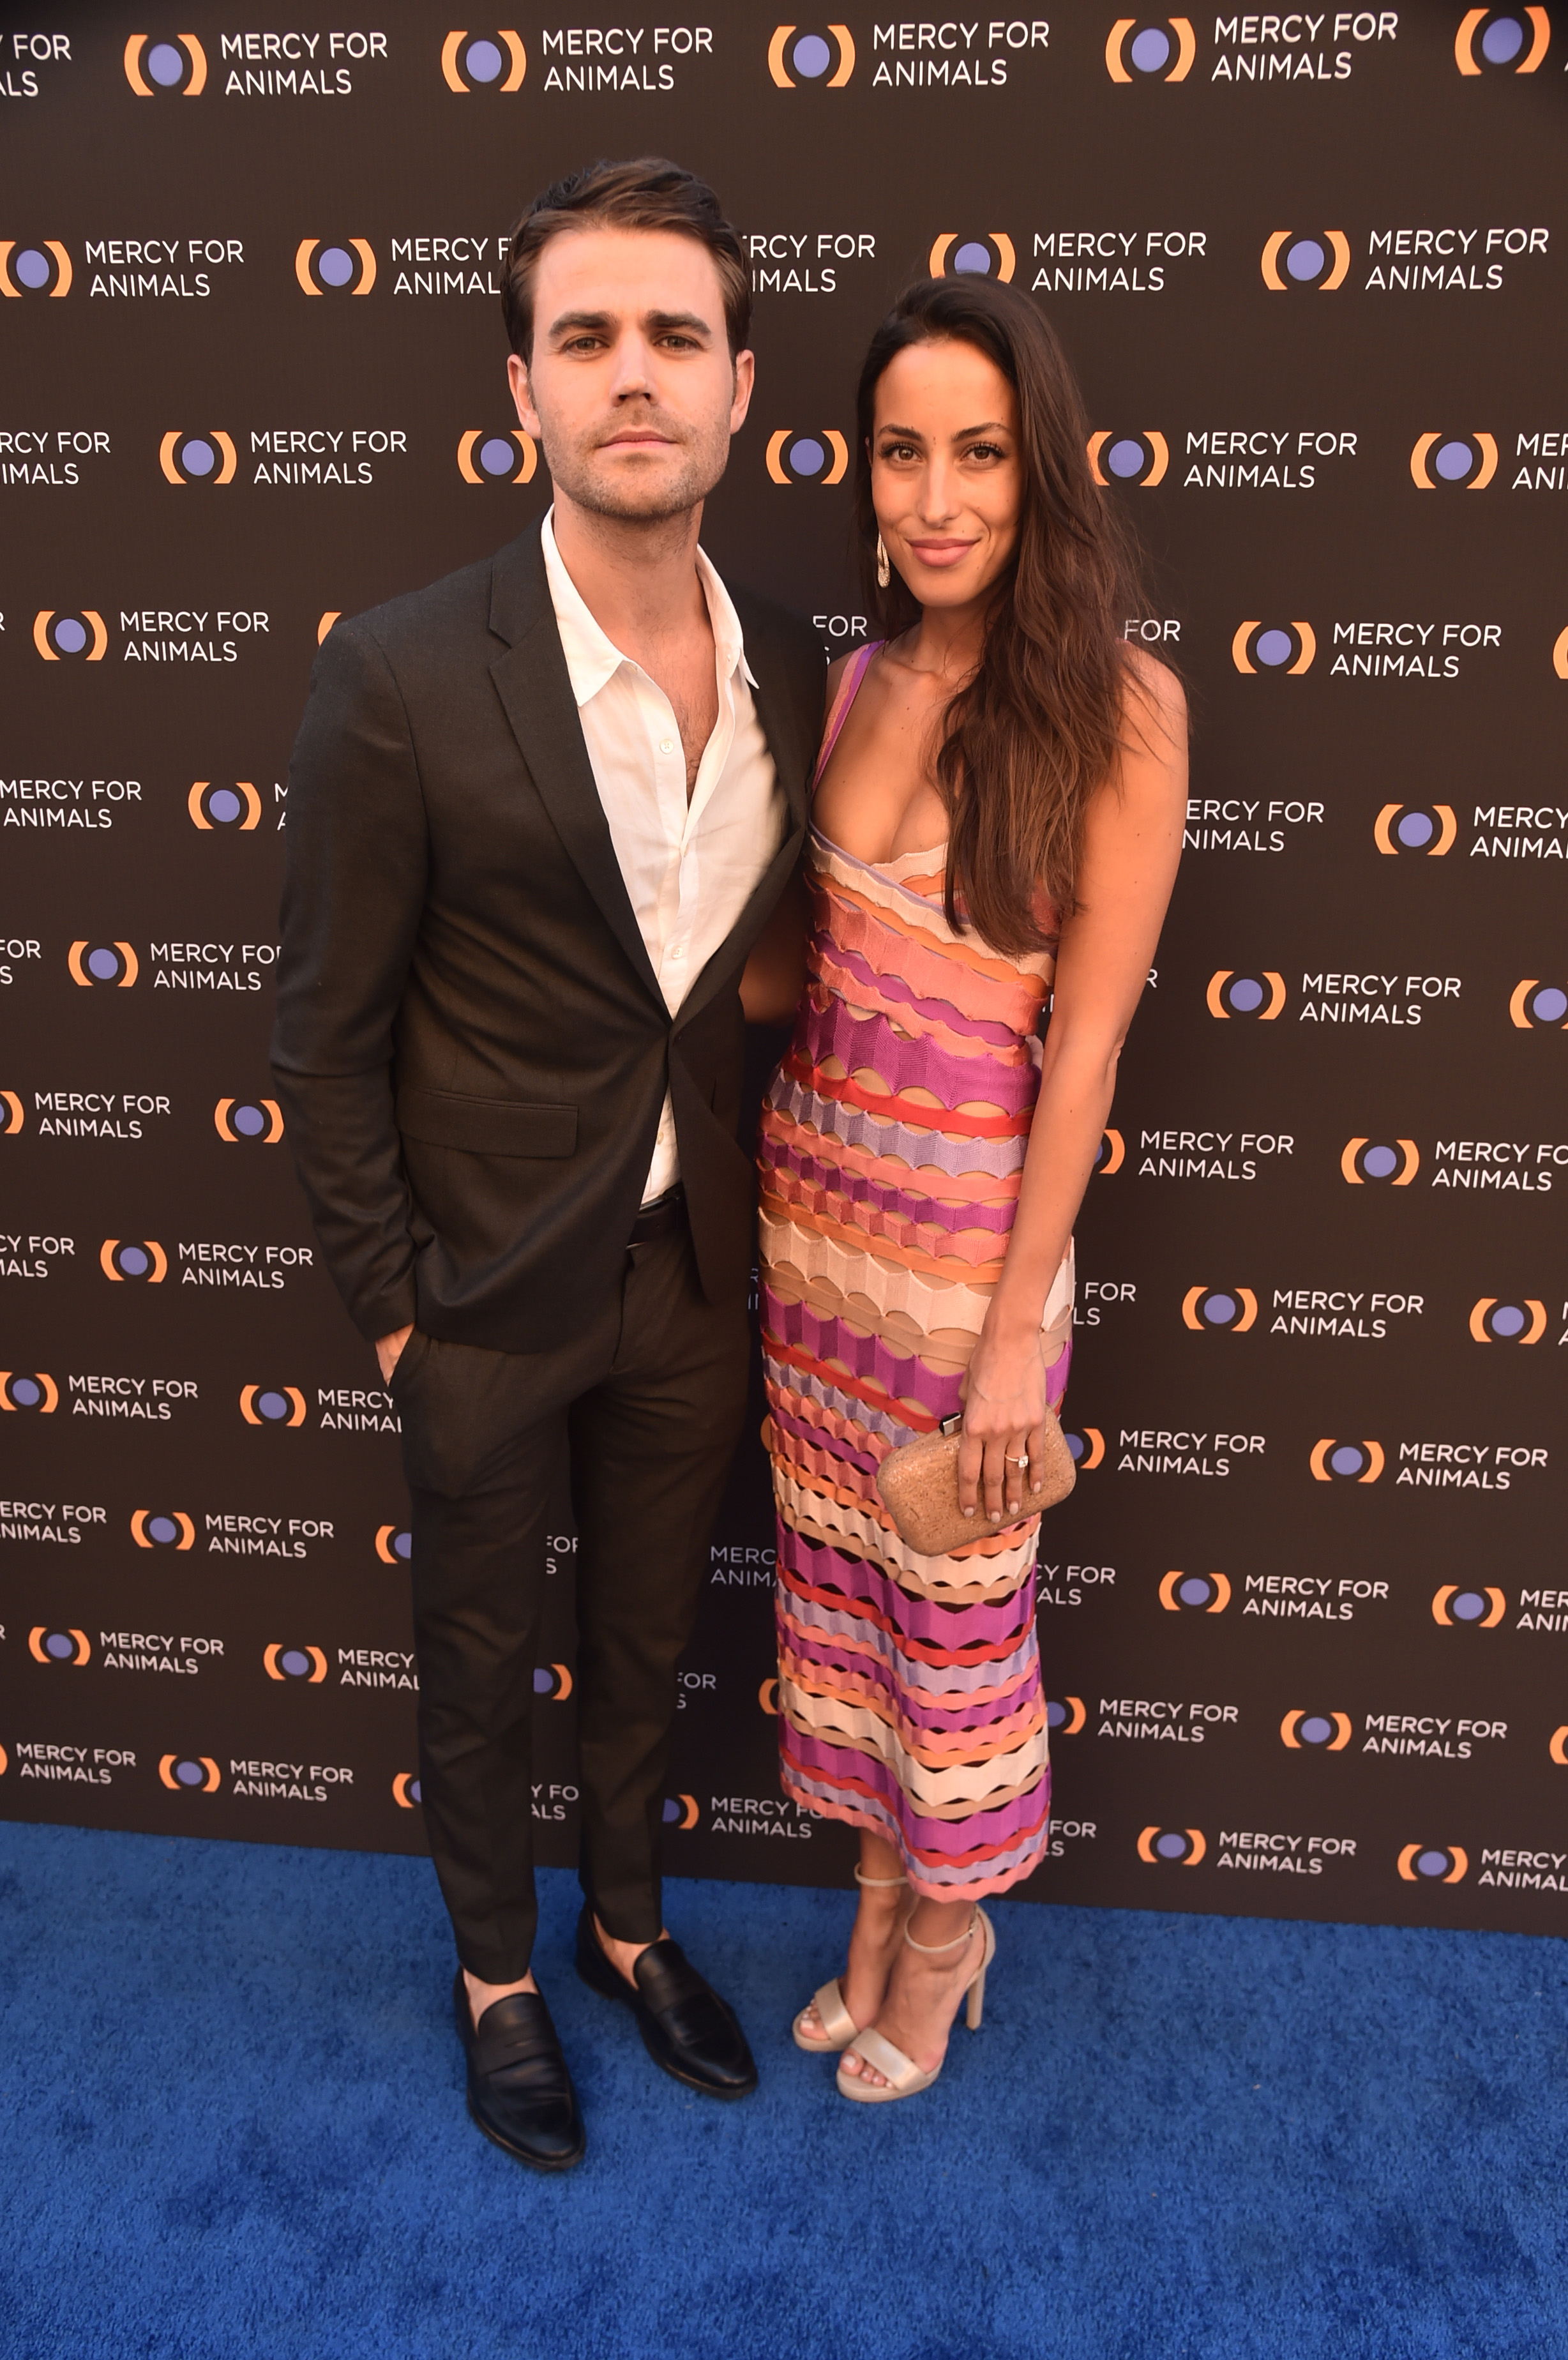 Paul Wesley And Ines De Ramon attend the Mercy For Animals 20th Anniversary Gala at The Shrine Auditorium on September 14, 2019 in Los Angeles, California | Source: Getty Images